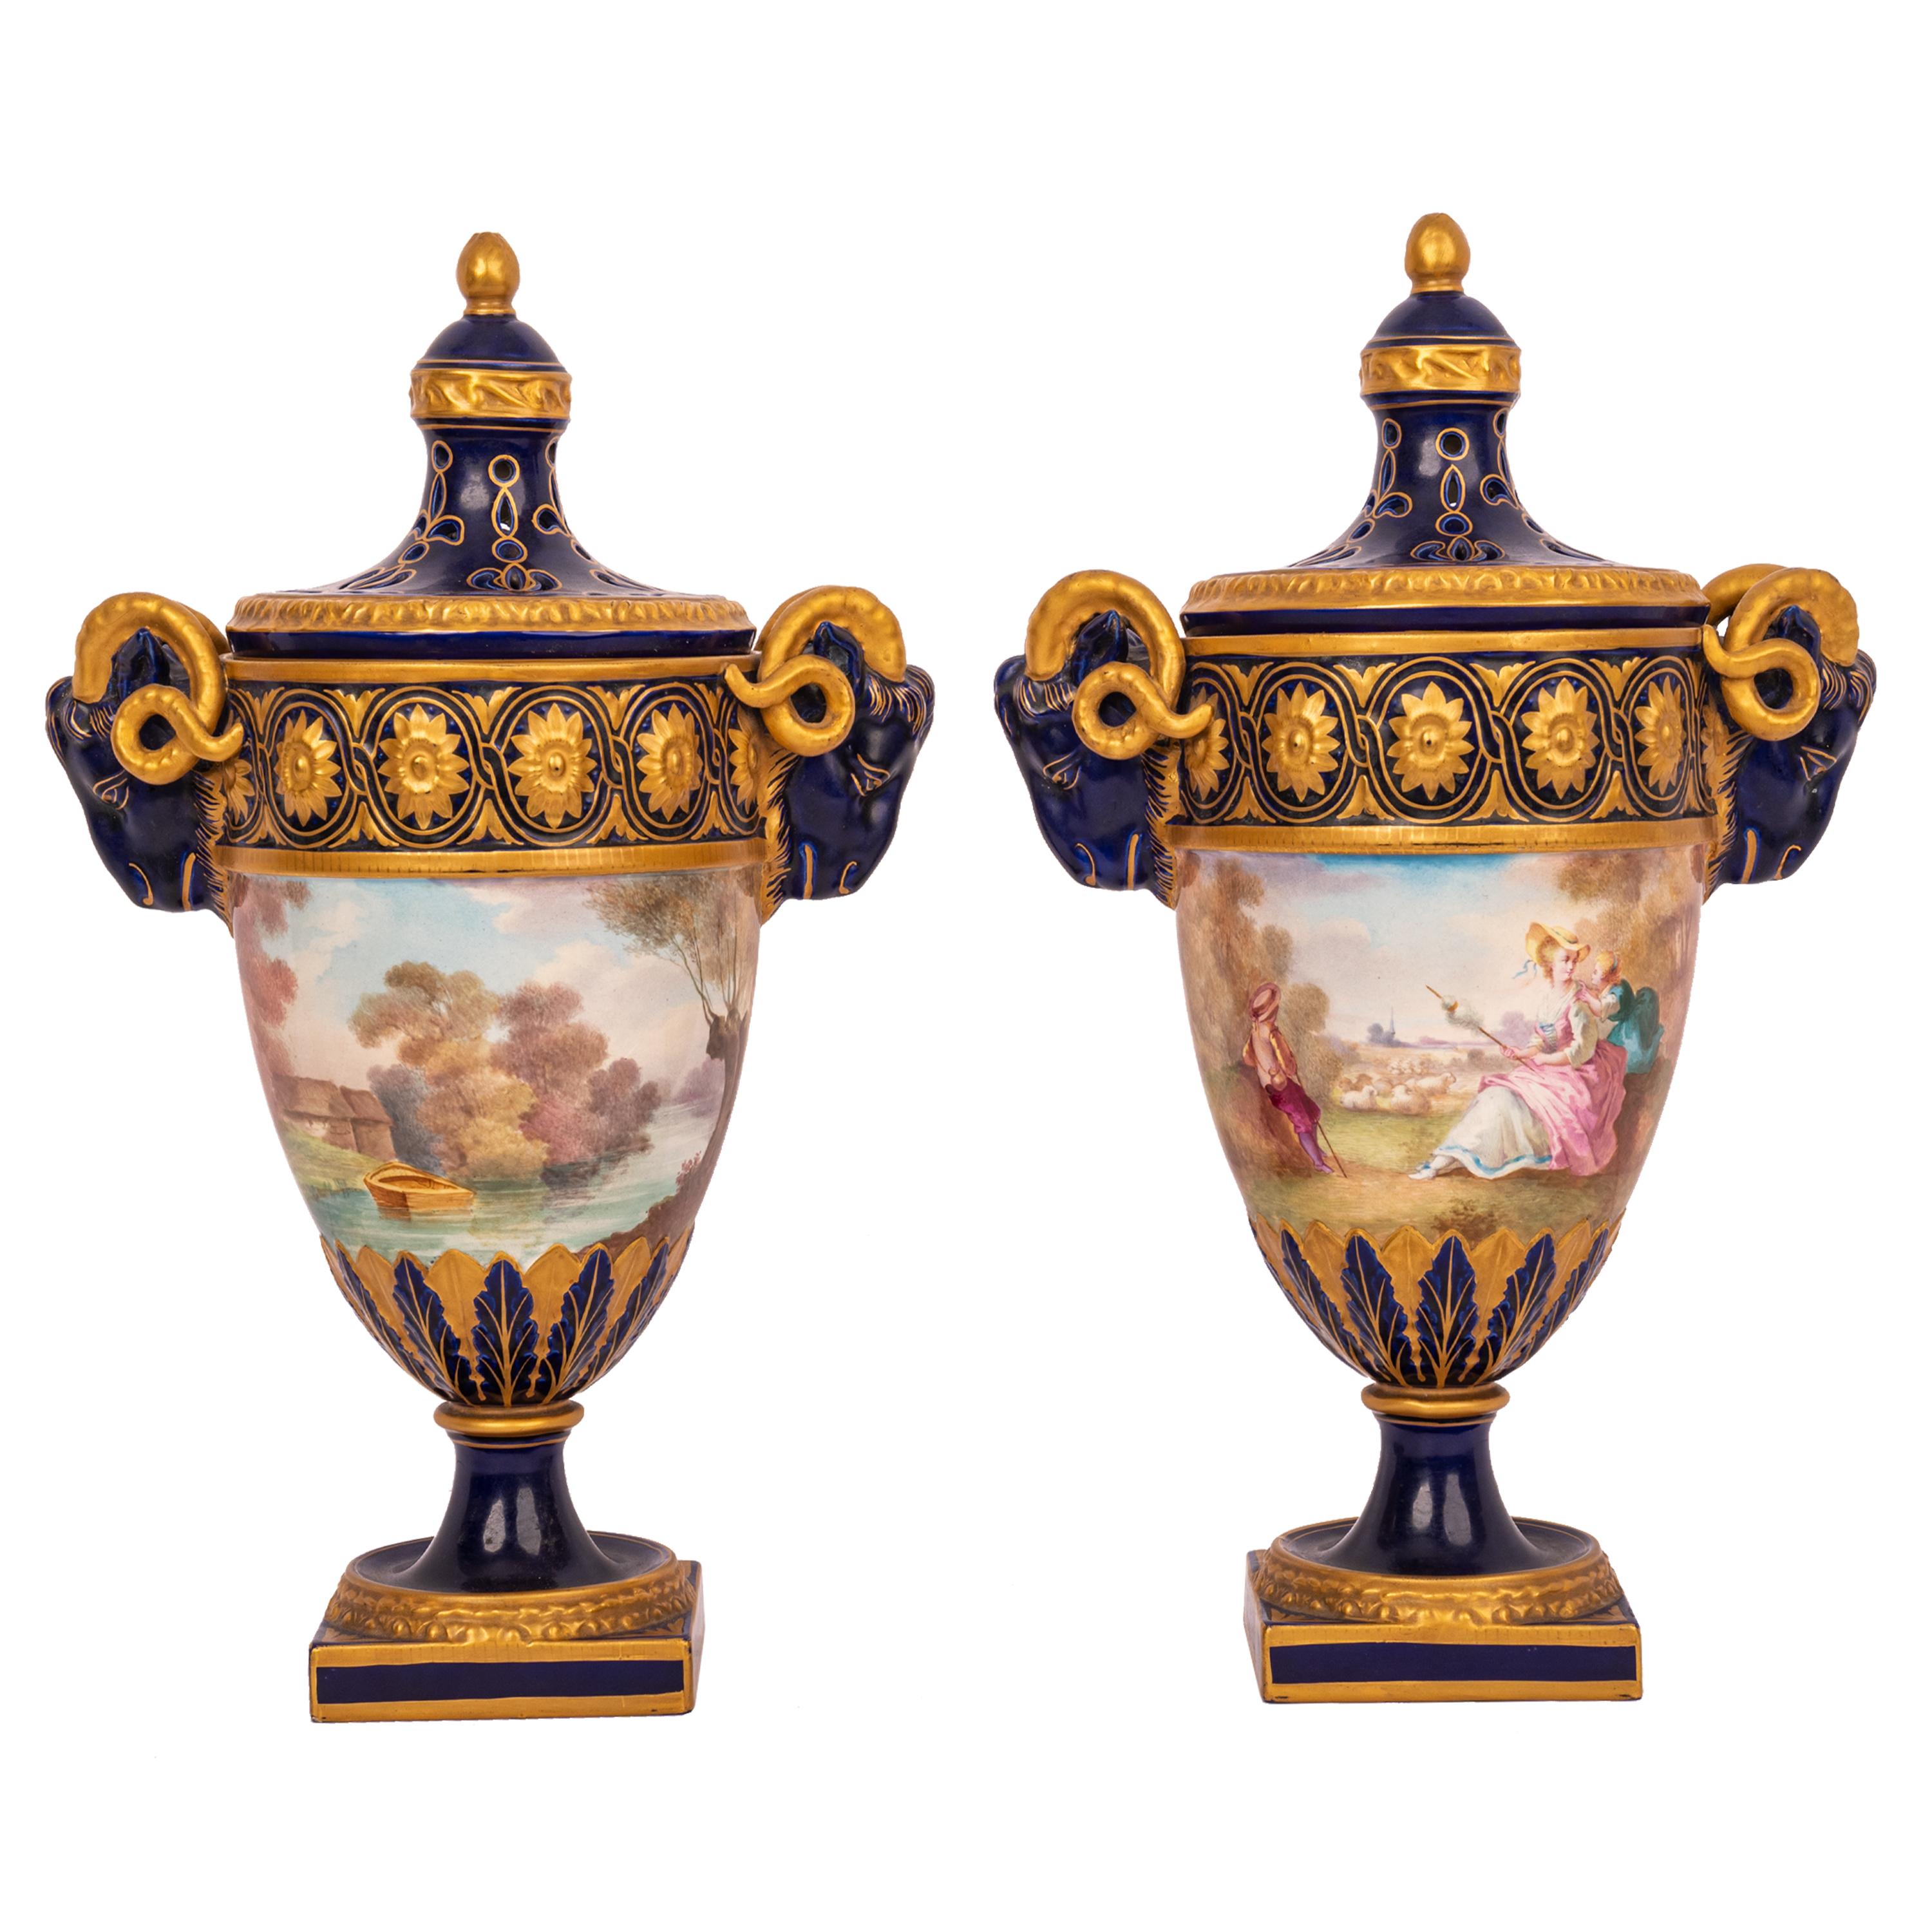 A very fine pair of antique 19th century French handpainted porcelain style pot-pourri urns, Veuve Perrin, Marseilles.
The urns were designed to receive fragrant pot pourri, each lid is surmounted with a gilded acorn shape finial and having pierced